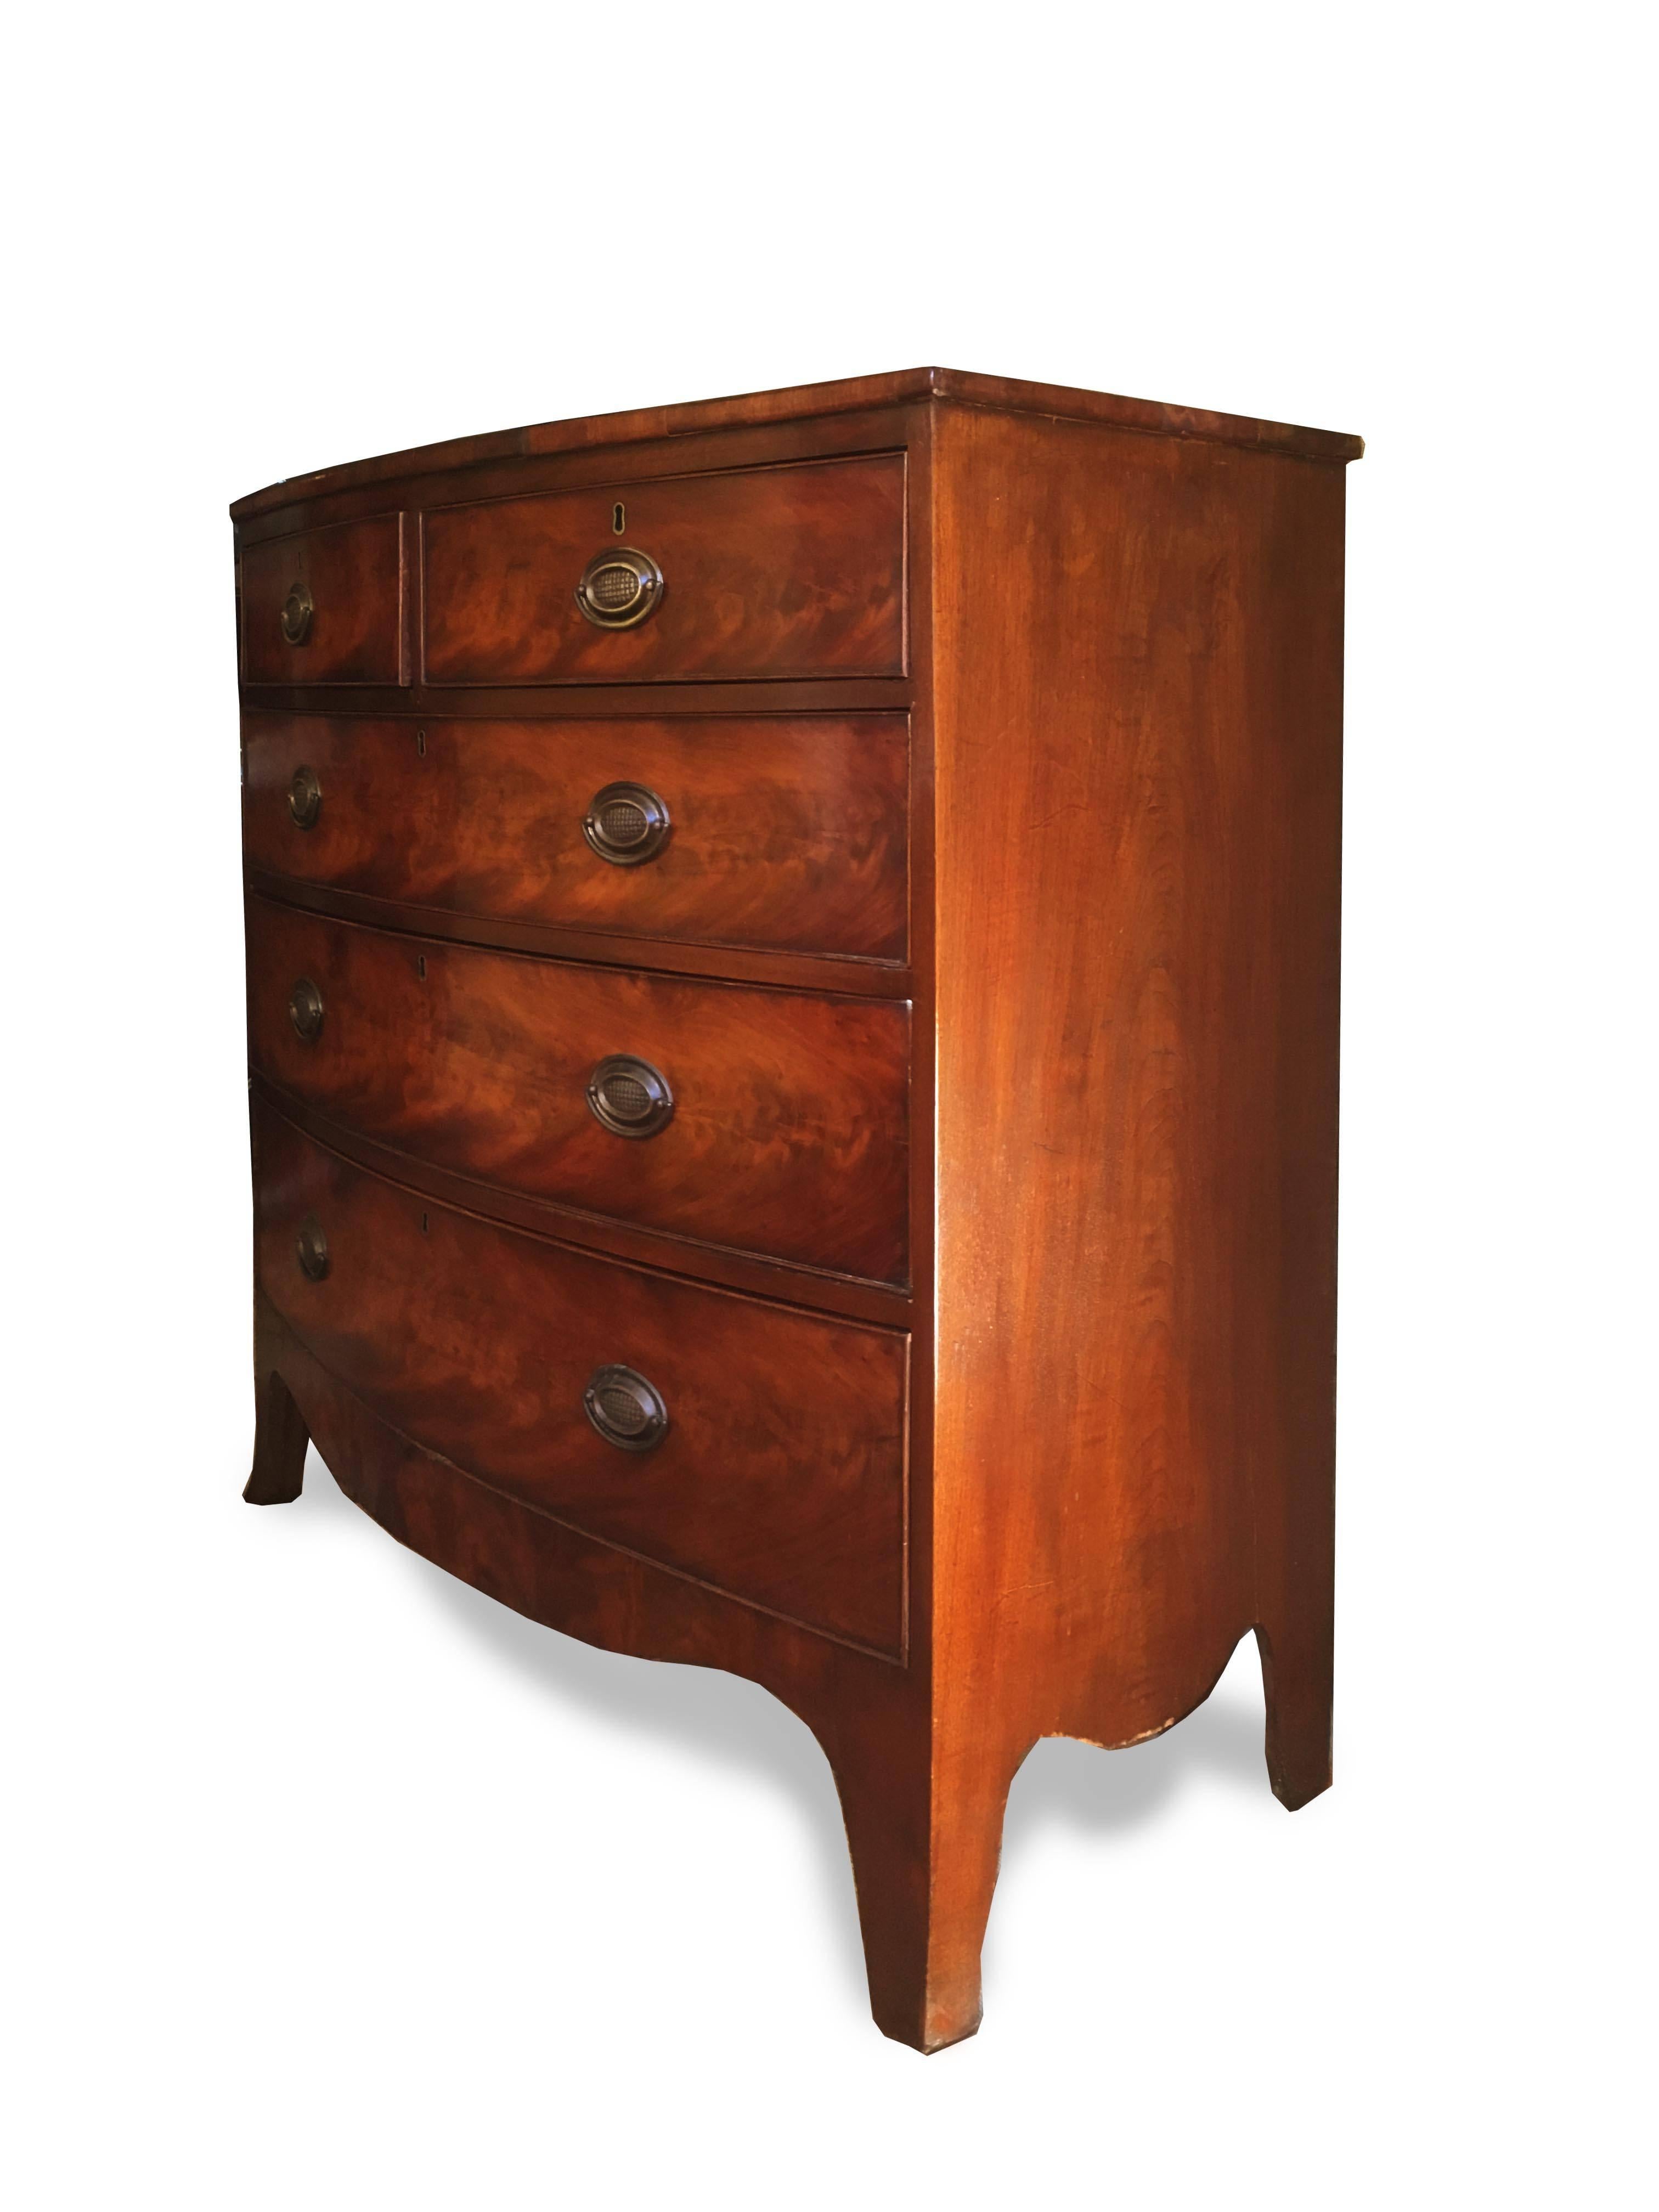 A stunning George III bow front mahogany dresser with three full length drawers and two smaller half drawers. The mahogany veneer is of exceptional quality and has mellowed to an attractive honey amber color. Oak and pine secondary woods. The